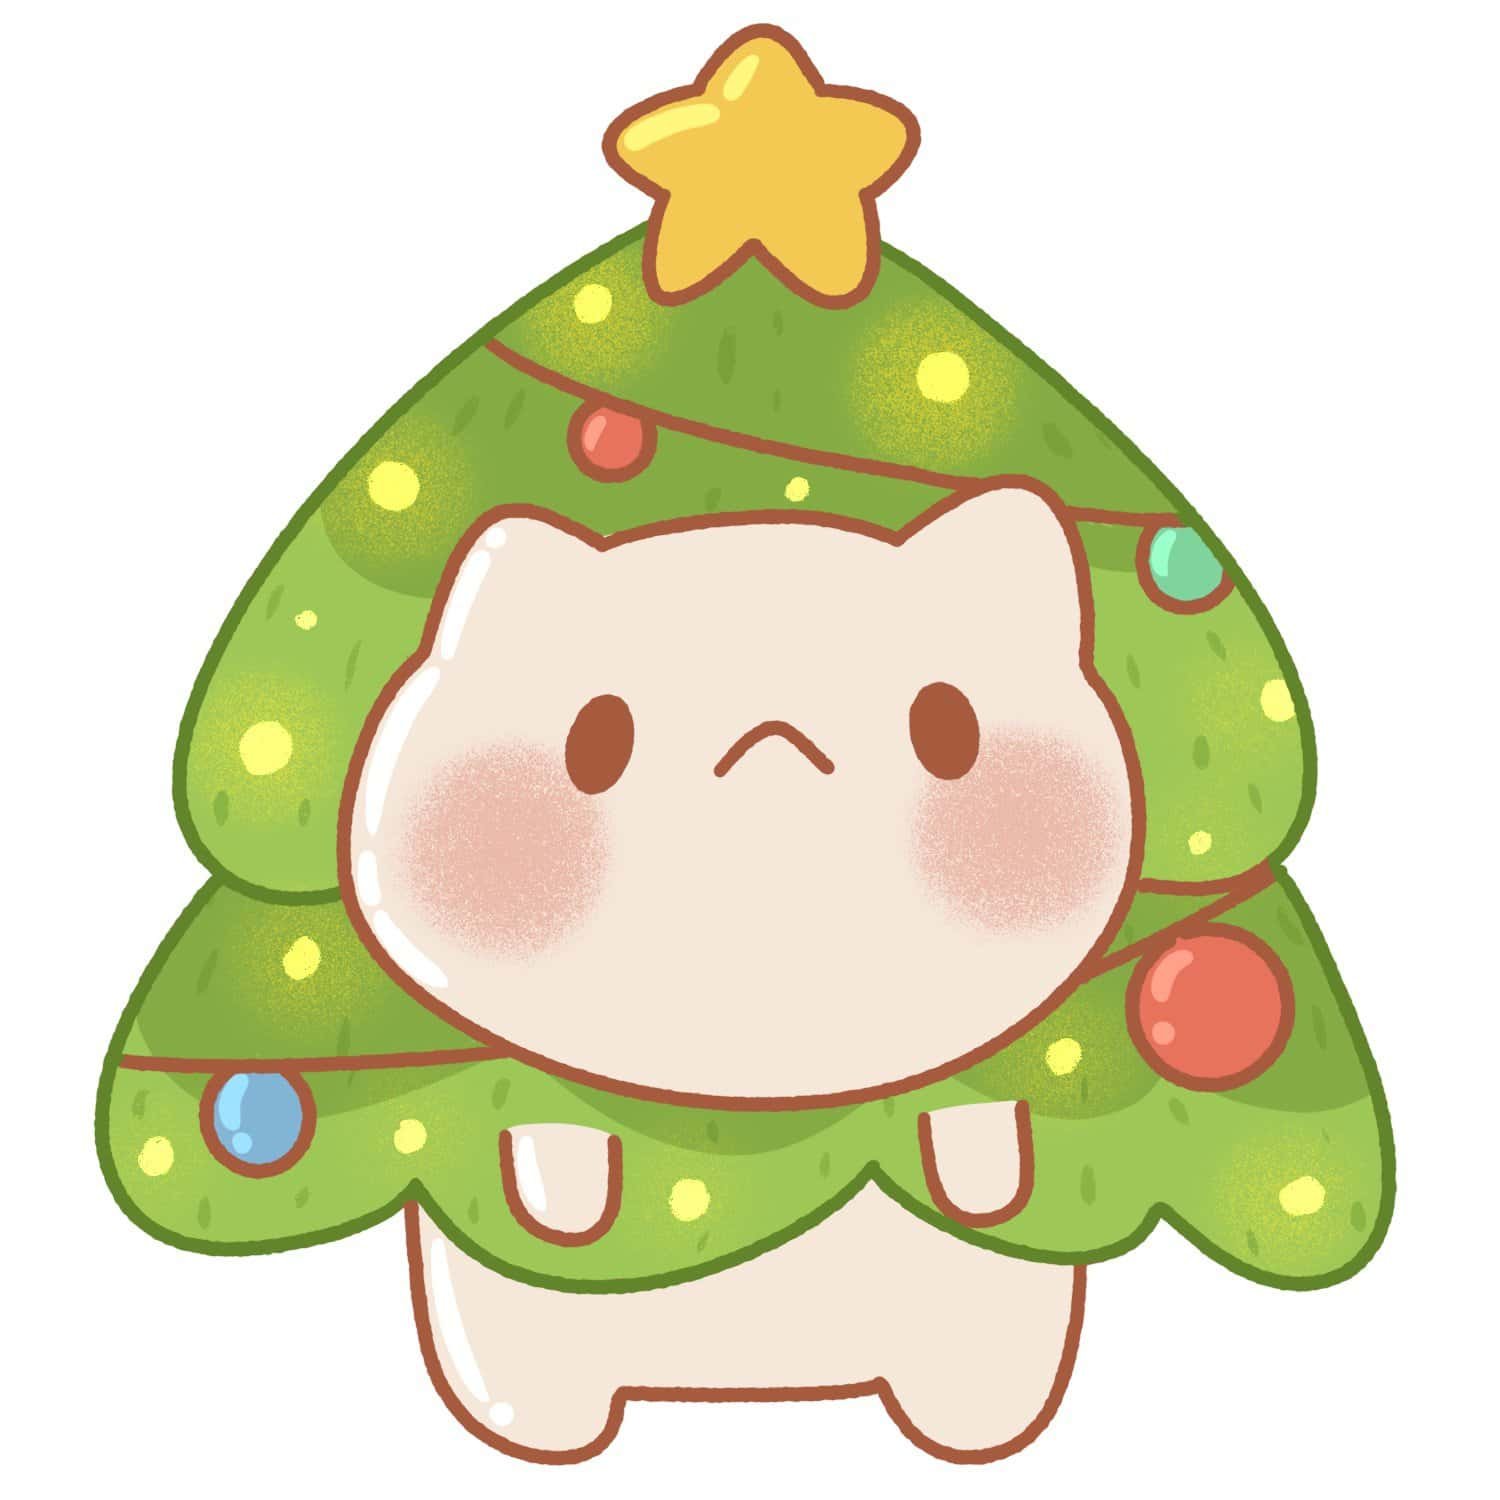 how to draw a cute cat in a christmas tree